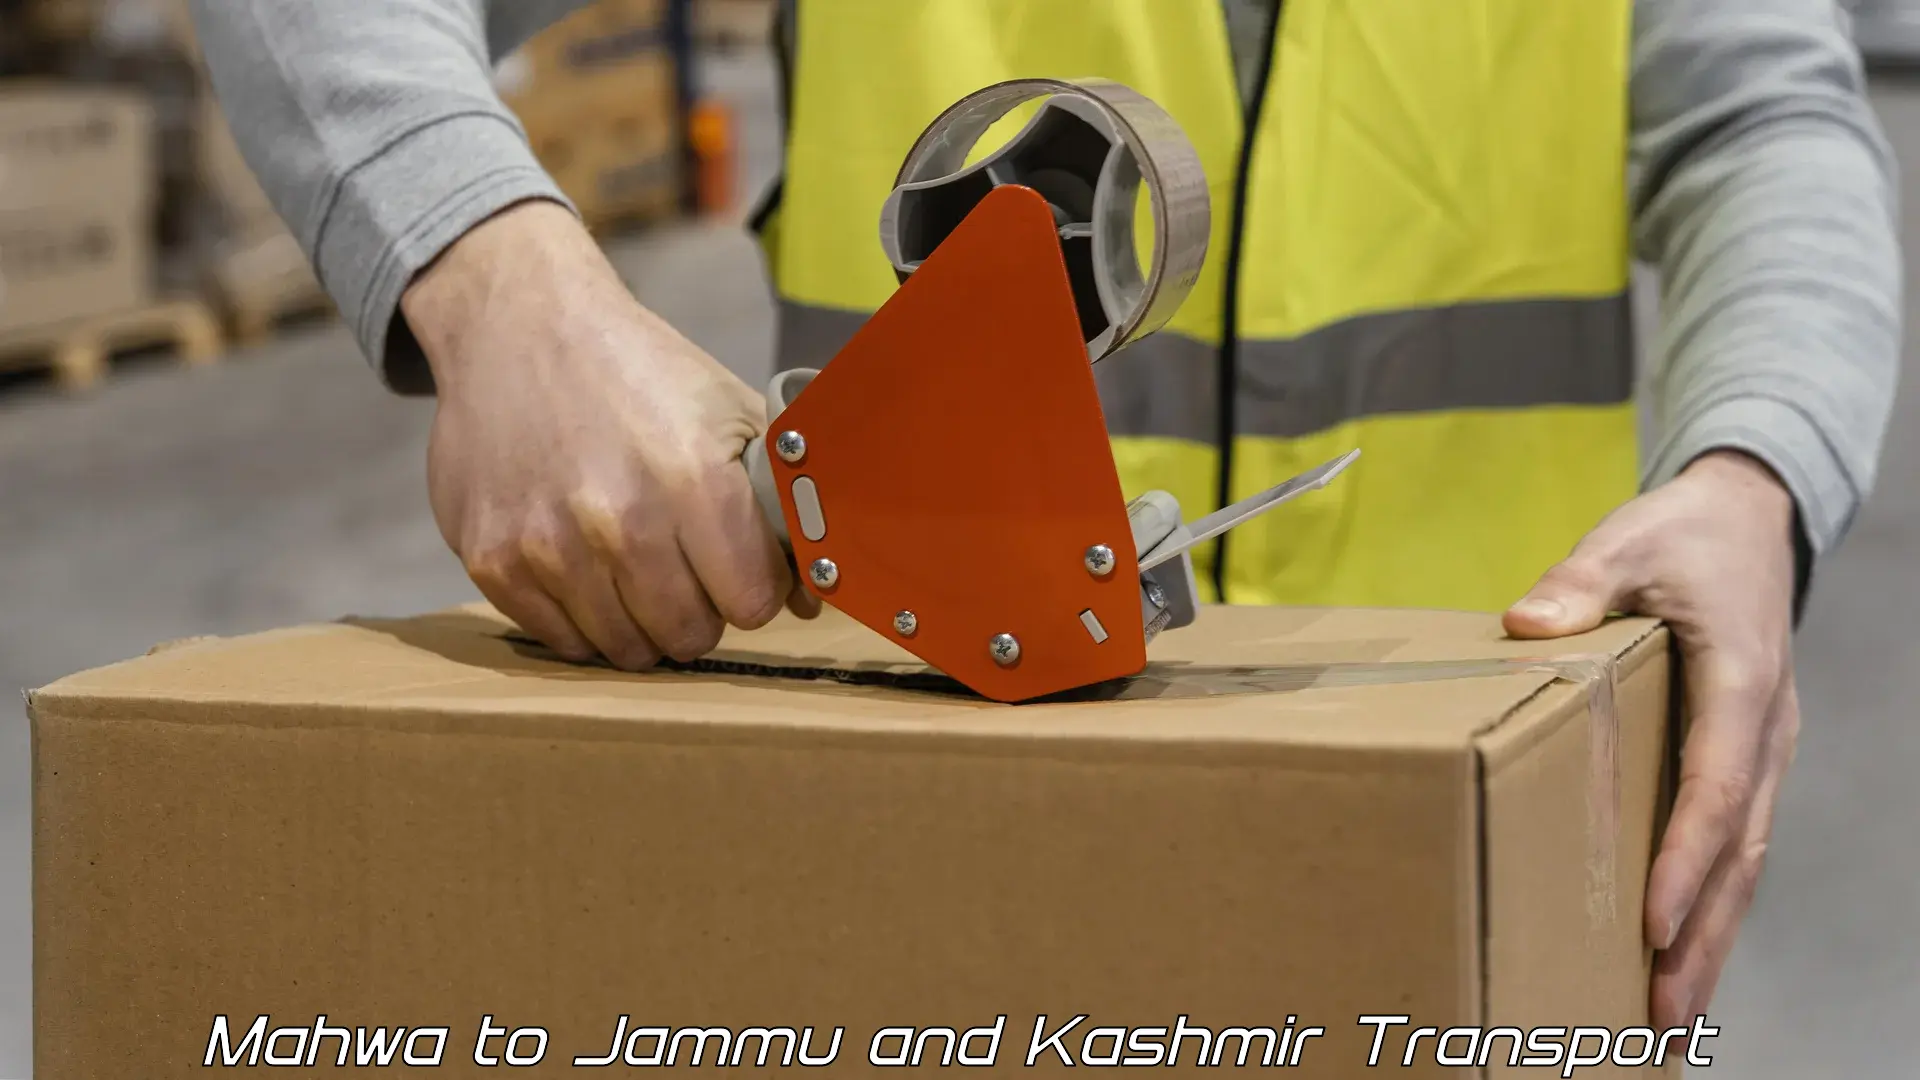 Truck transport companies in India Mahwa to Shopian